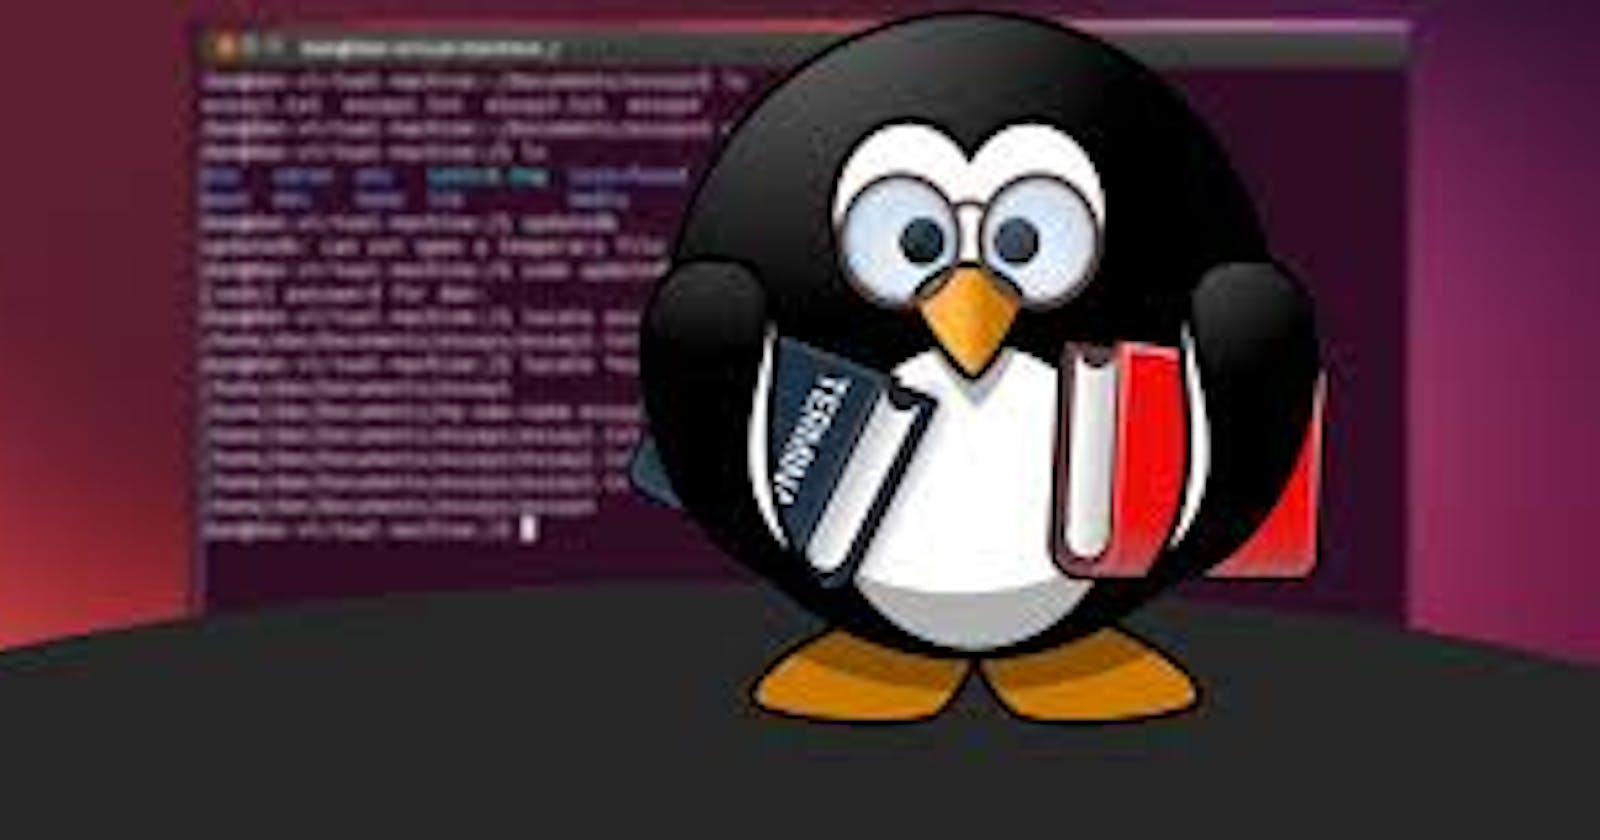 Entered into a Linux projects to work on.